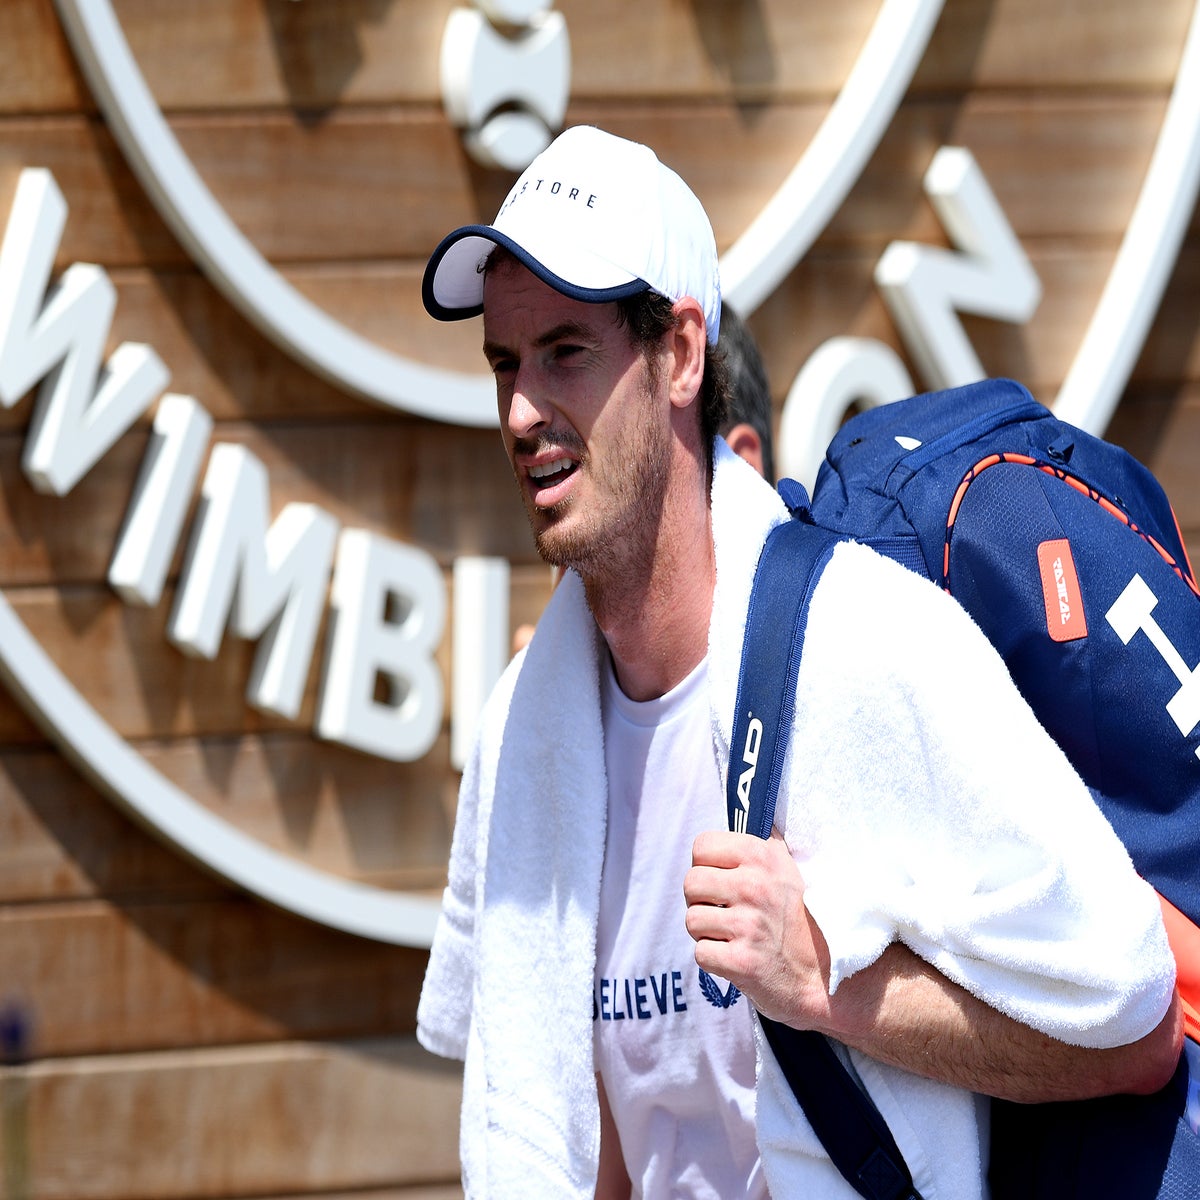 Wimbledon 2019: Why is Andy Murray wearing Castore kit and not old sponsors Under Armour or